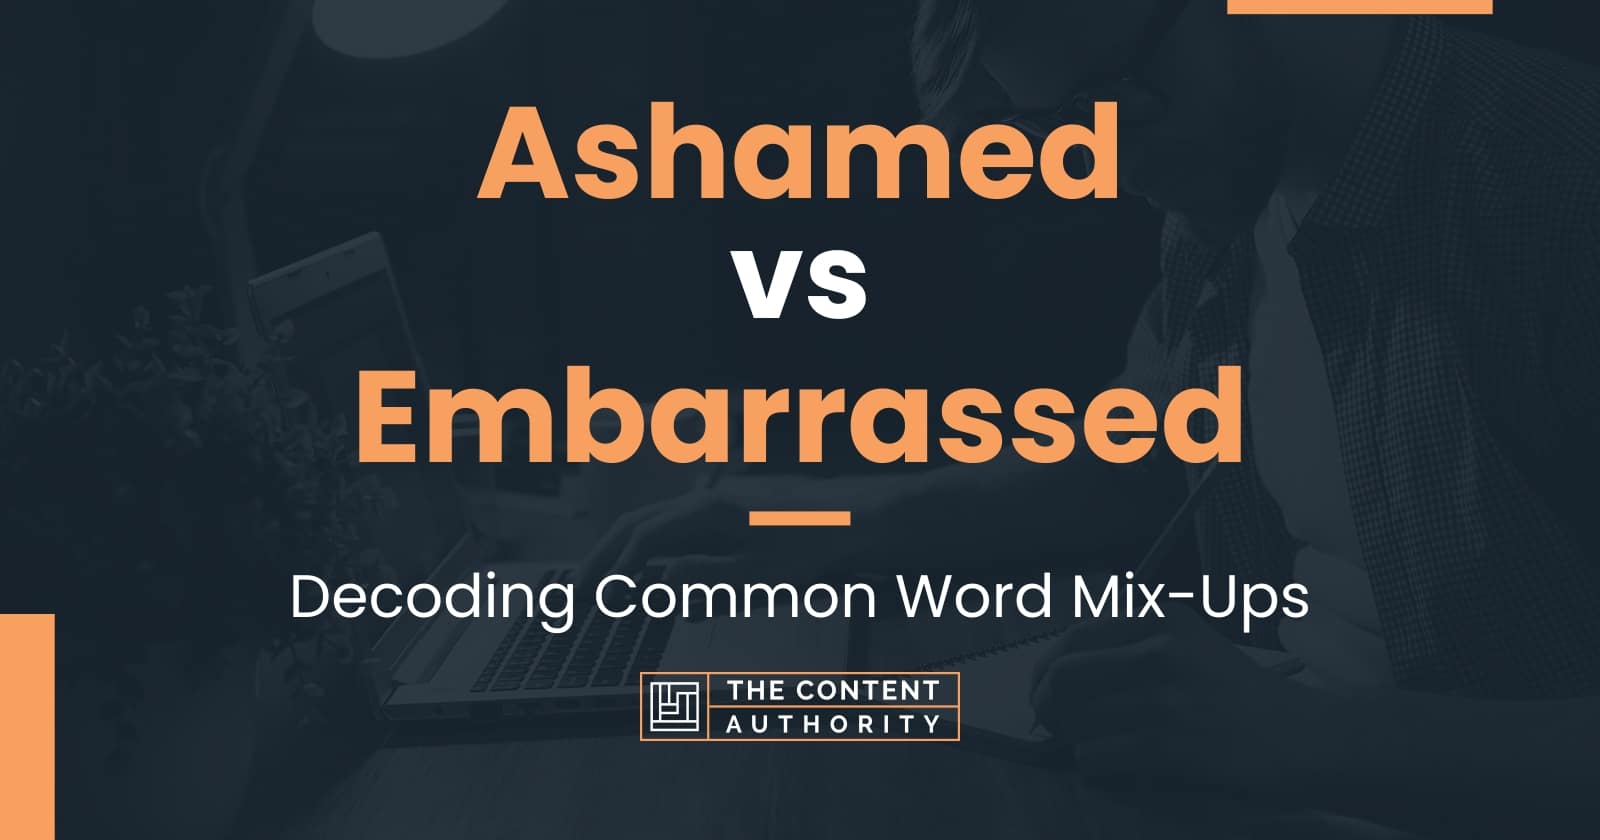 Ashamed vs Embarrassed: Decoding Common Word Mix-Ups